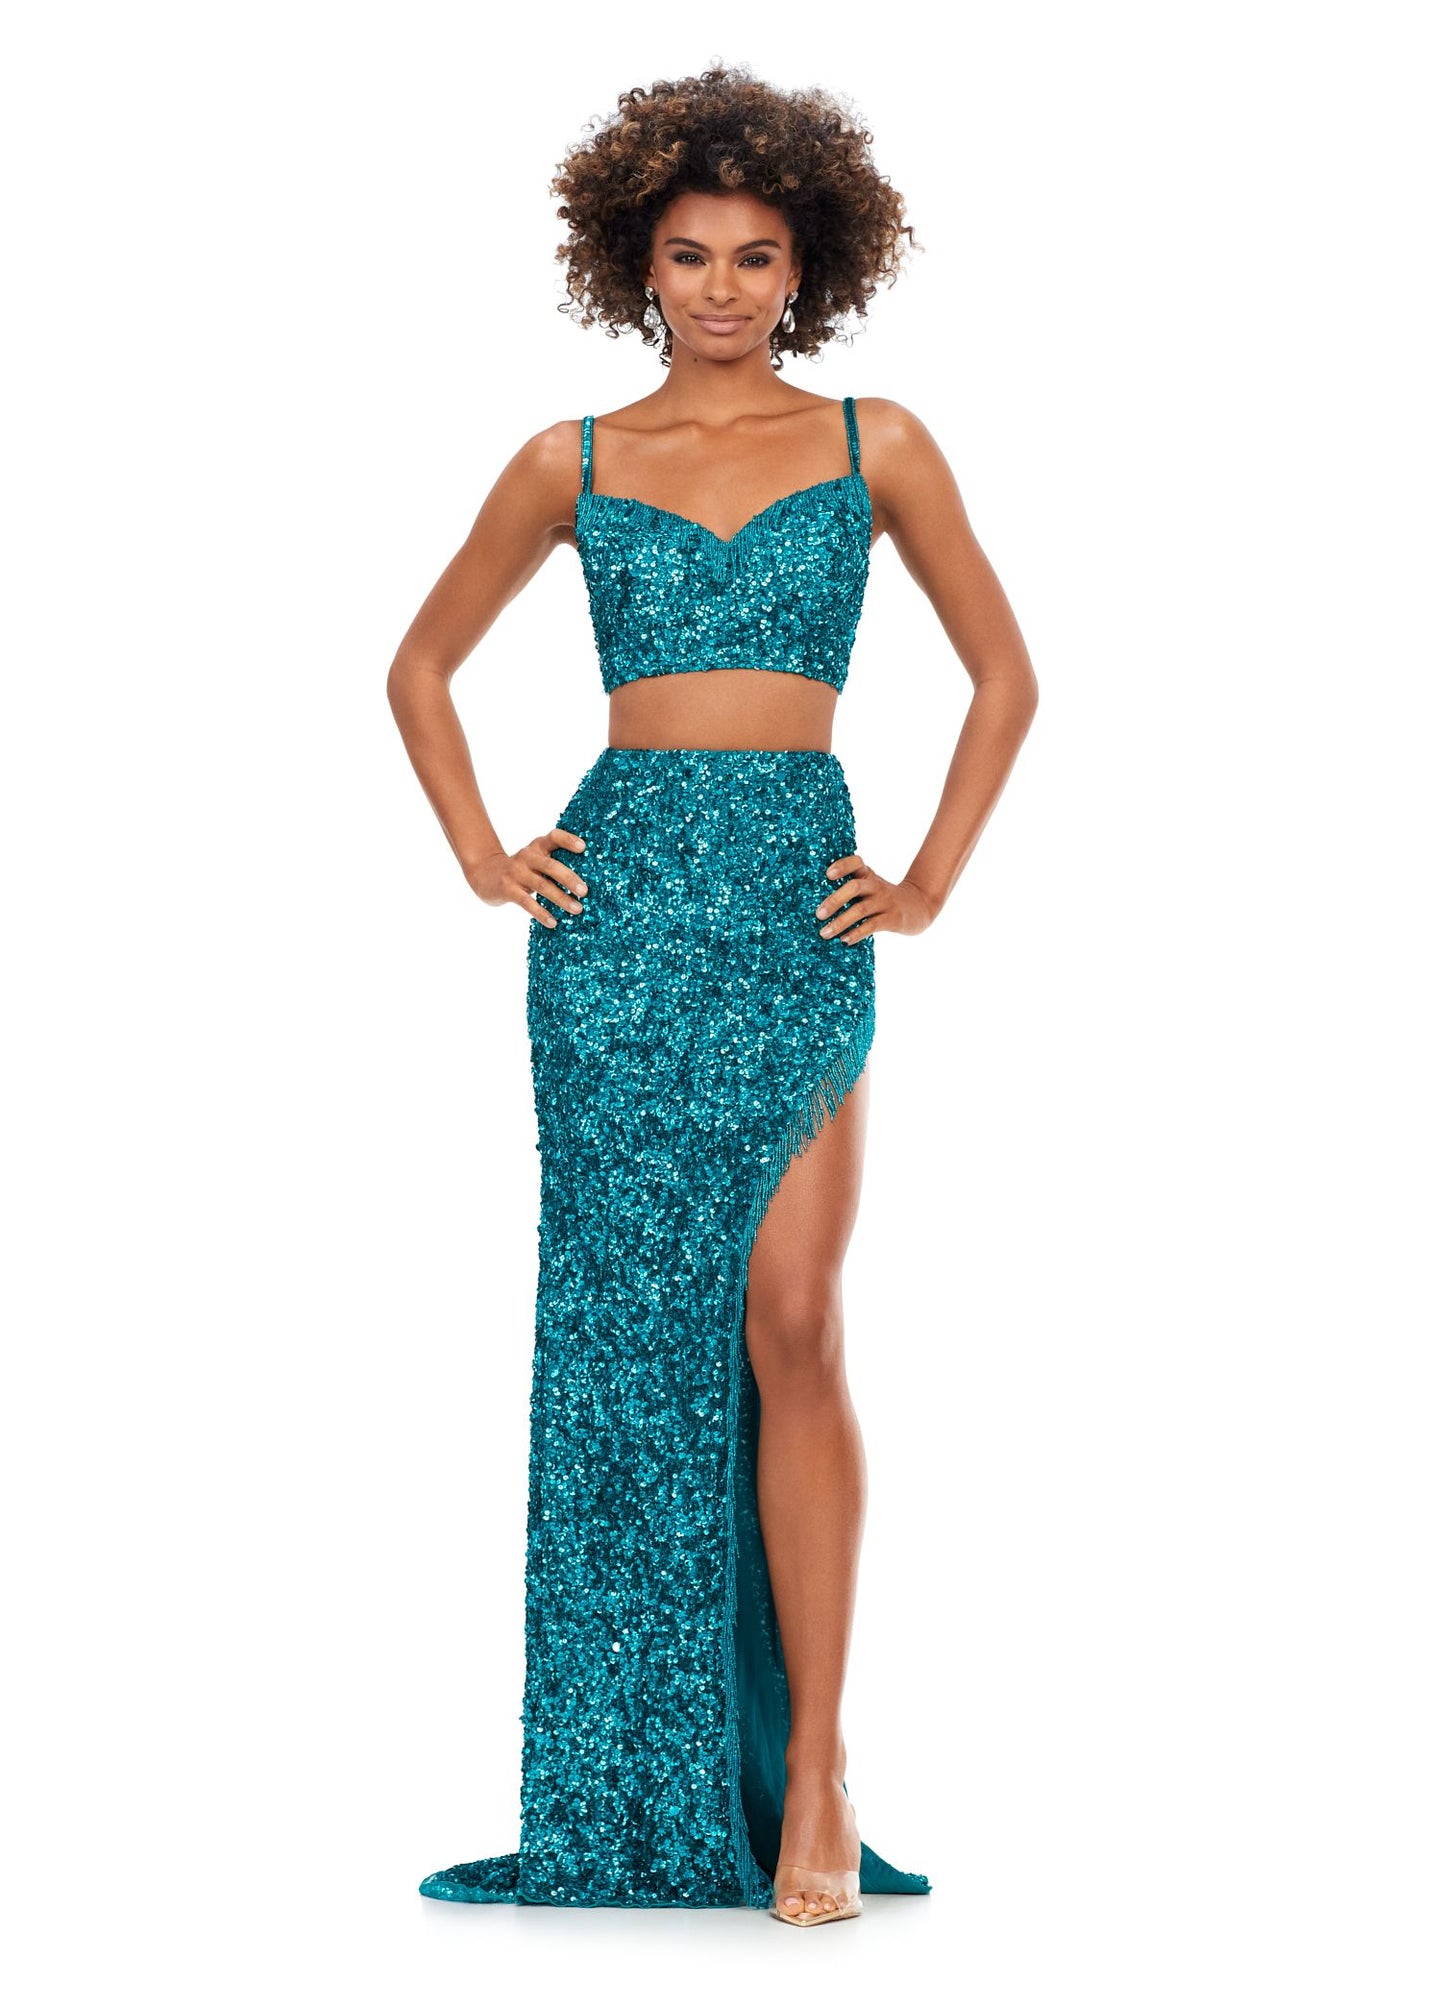 Ashley Lauren 11370 Sequin Two Piece Prom Dress with Fringe